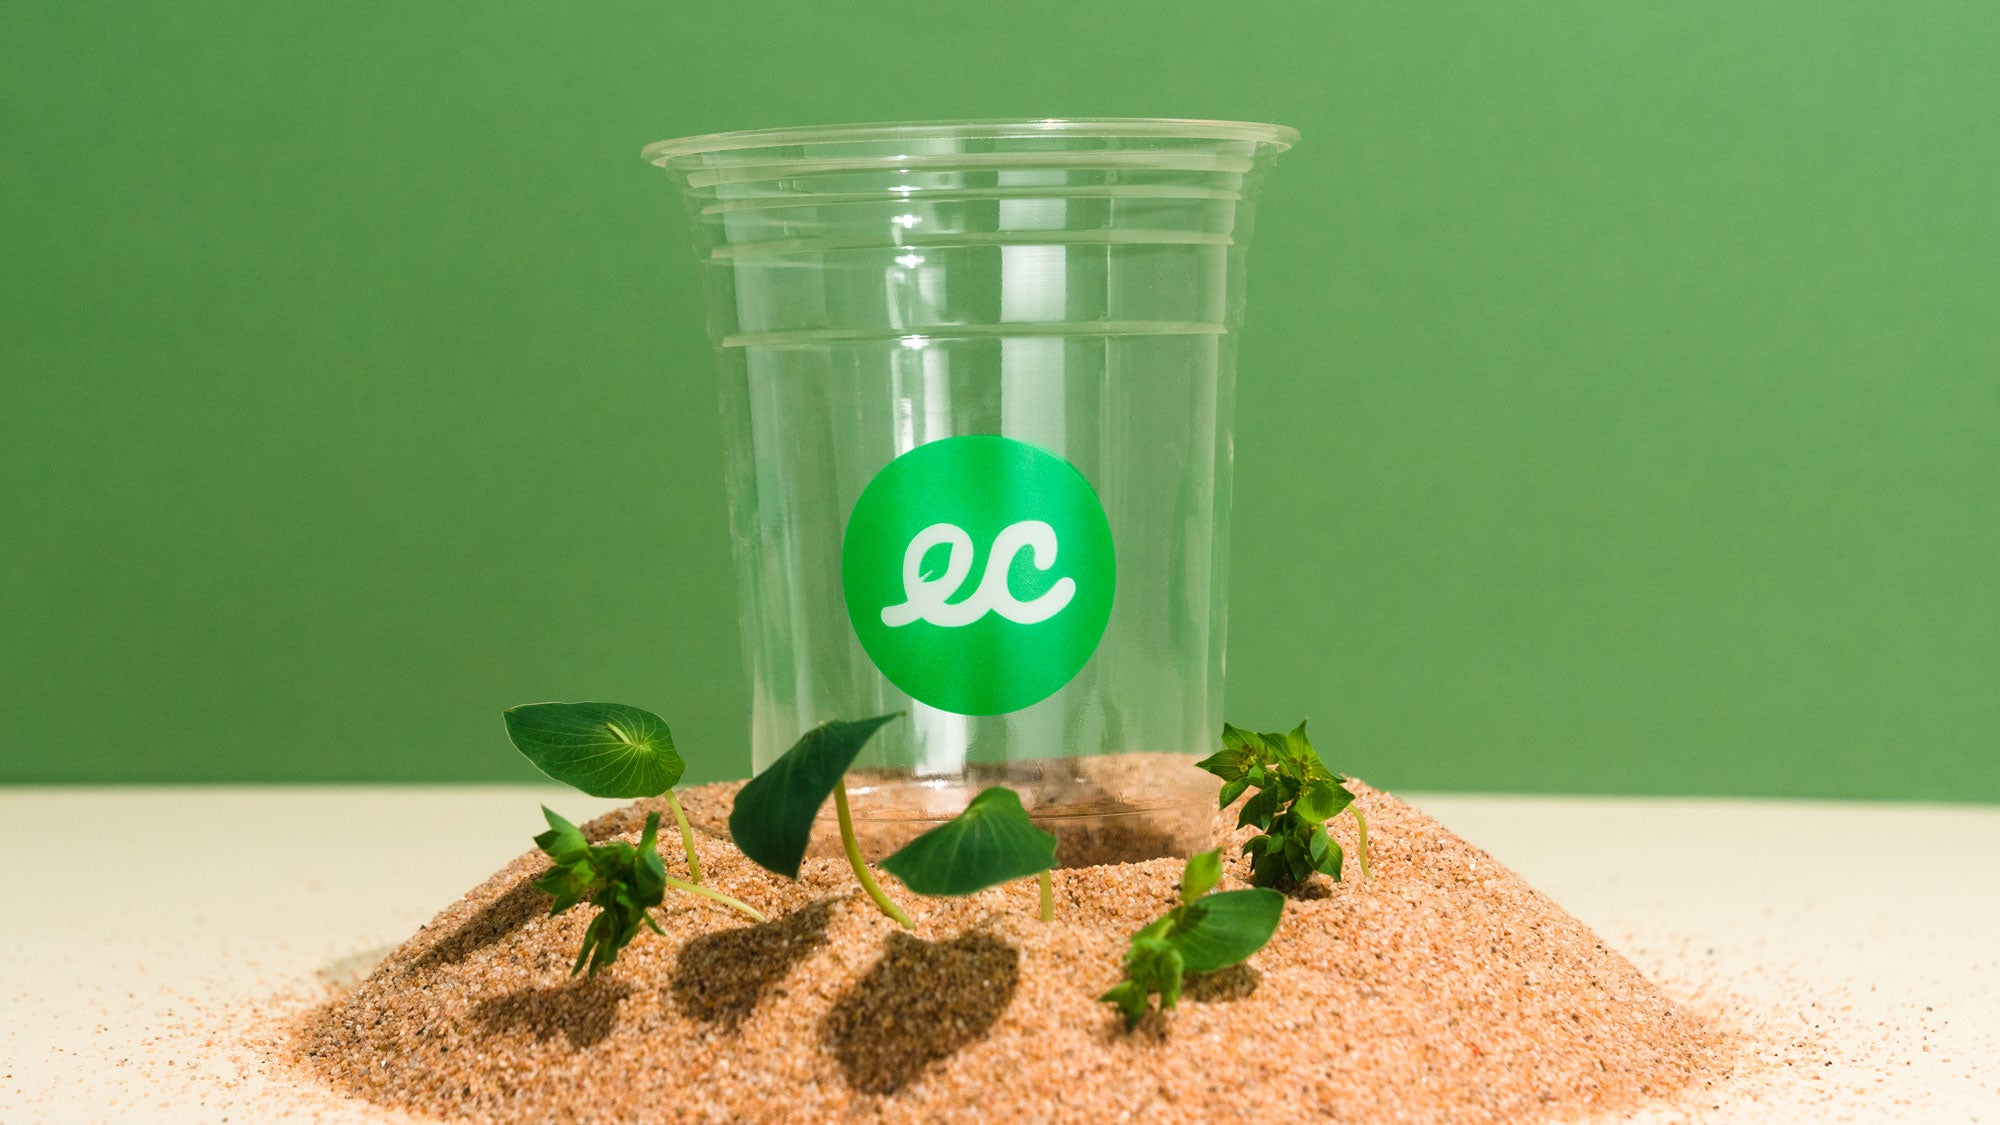 Green Compostable Earth Cup In Dirt